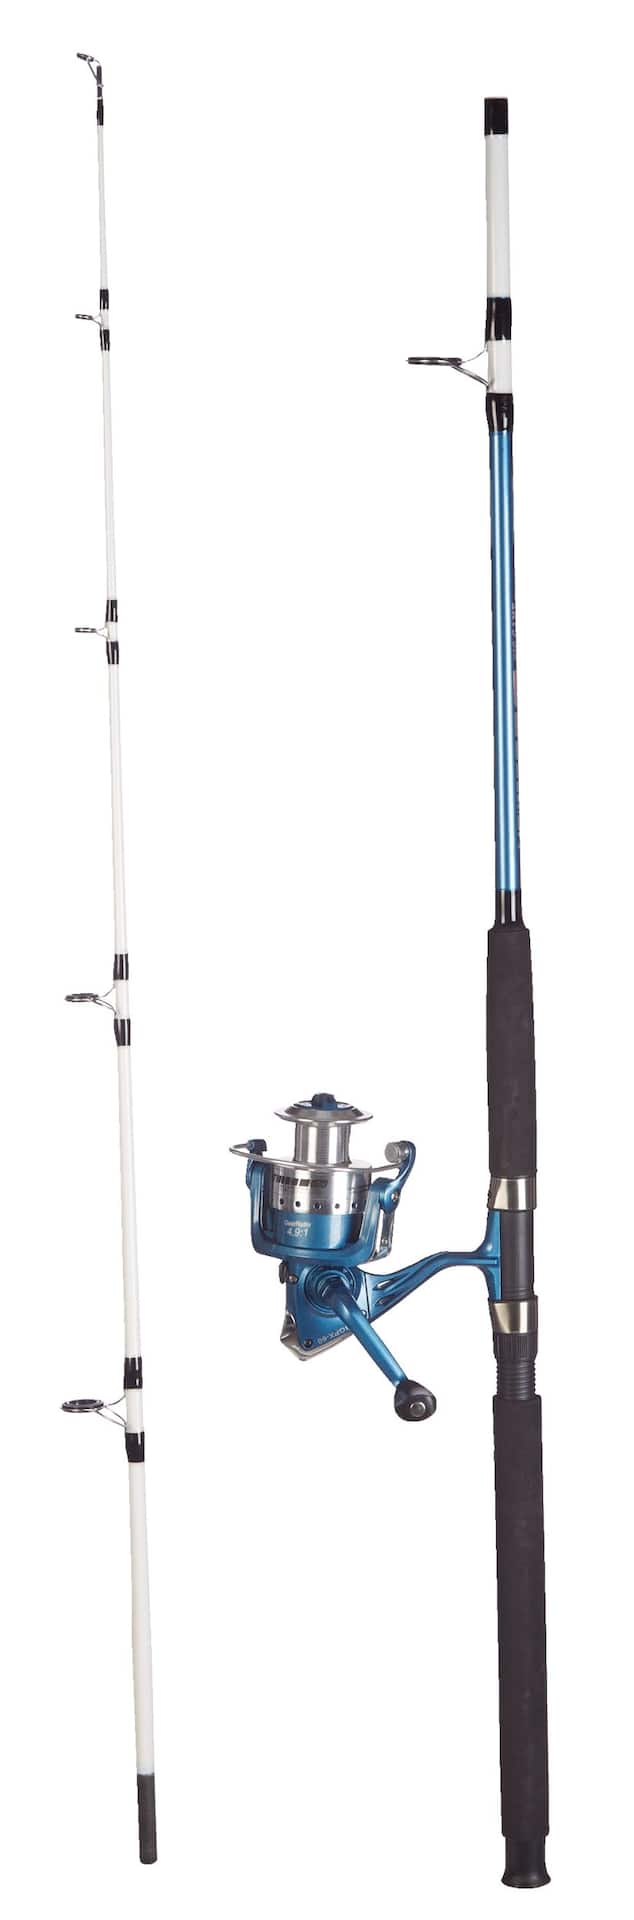 https://media-www.canadiantire.ca/product/playing/fishing/fishing-equipment/1782433/ht-big-game-pro-extreme-6-6-medium-heavy-ae0bf9d7-a167-4af4-9c34-18c131d21a7a-jpgrendition.jpg